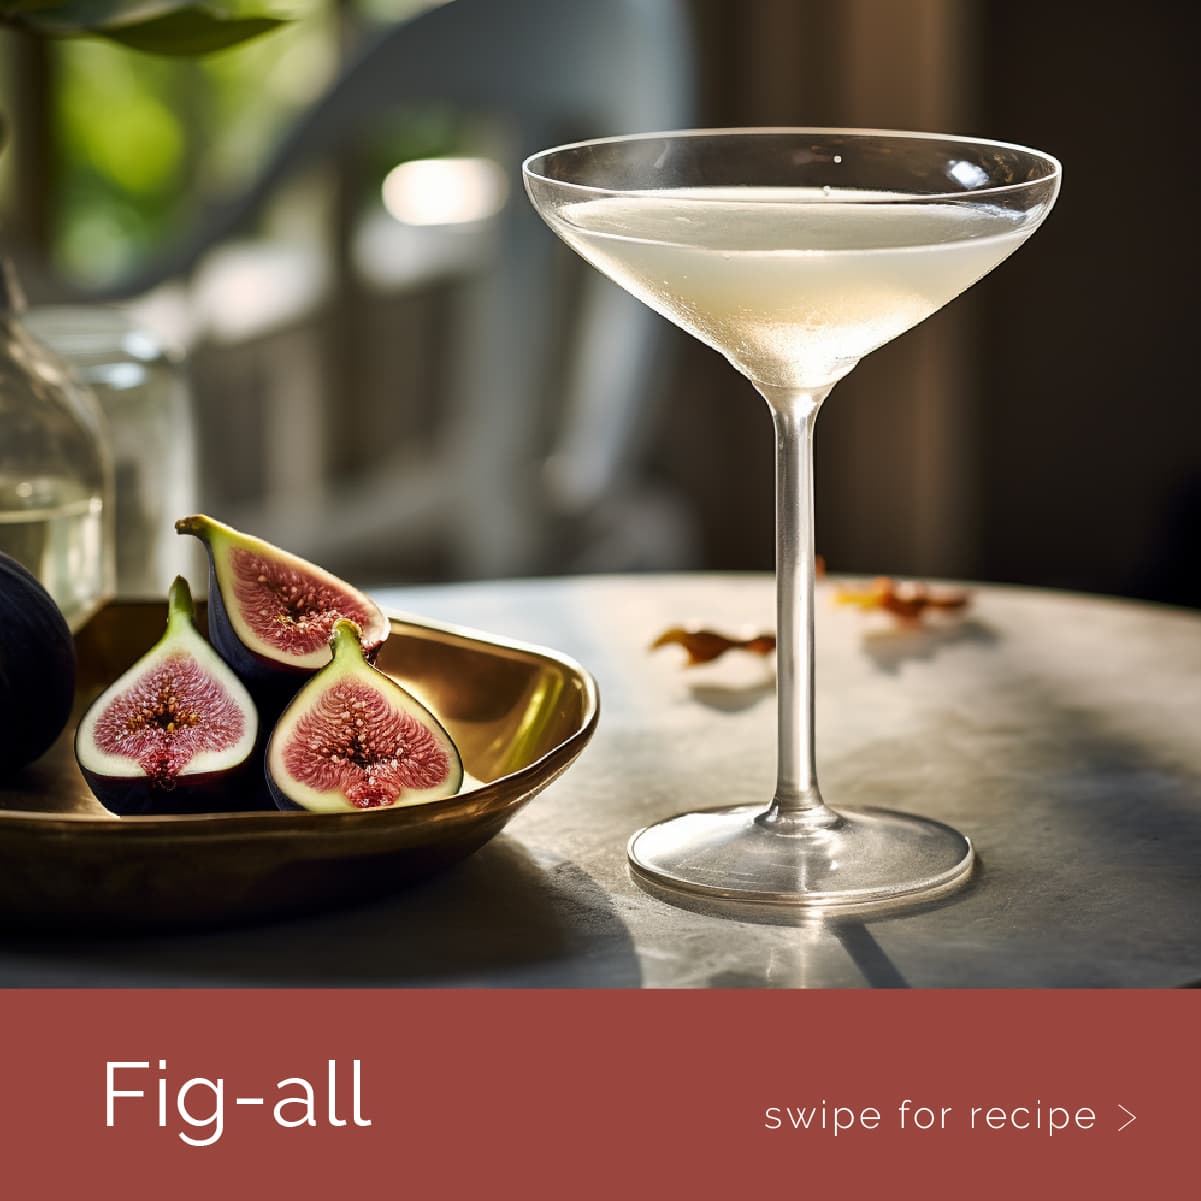 A Fig-all cocktail